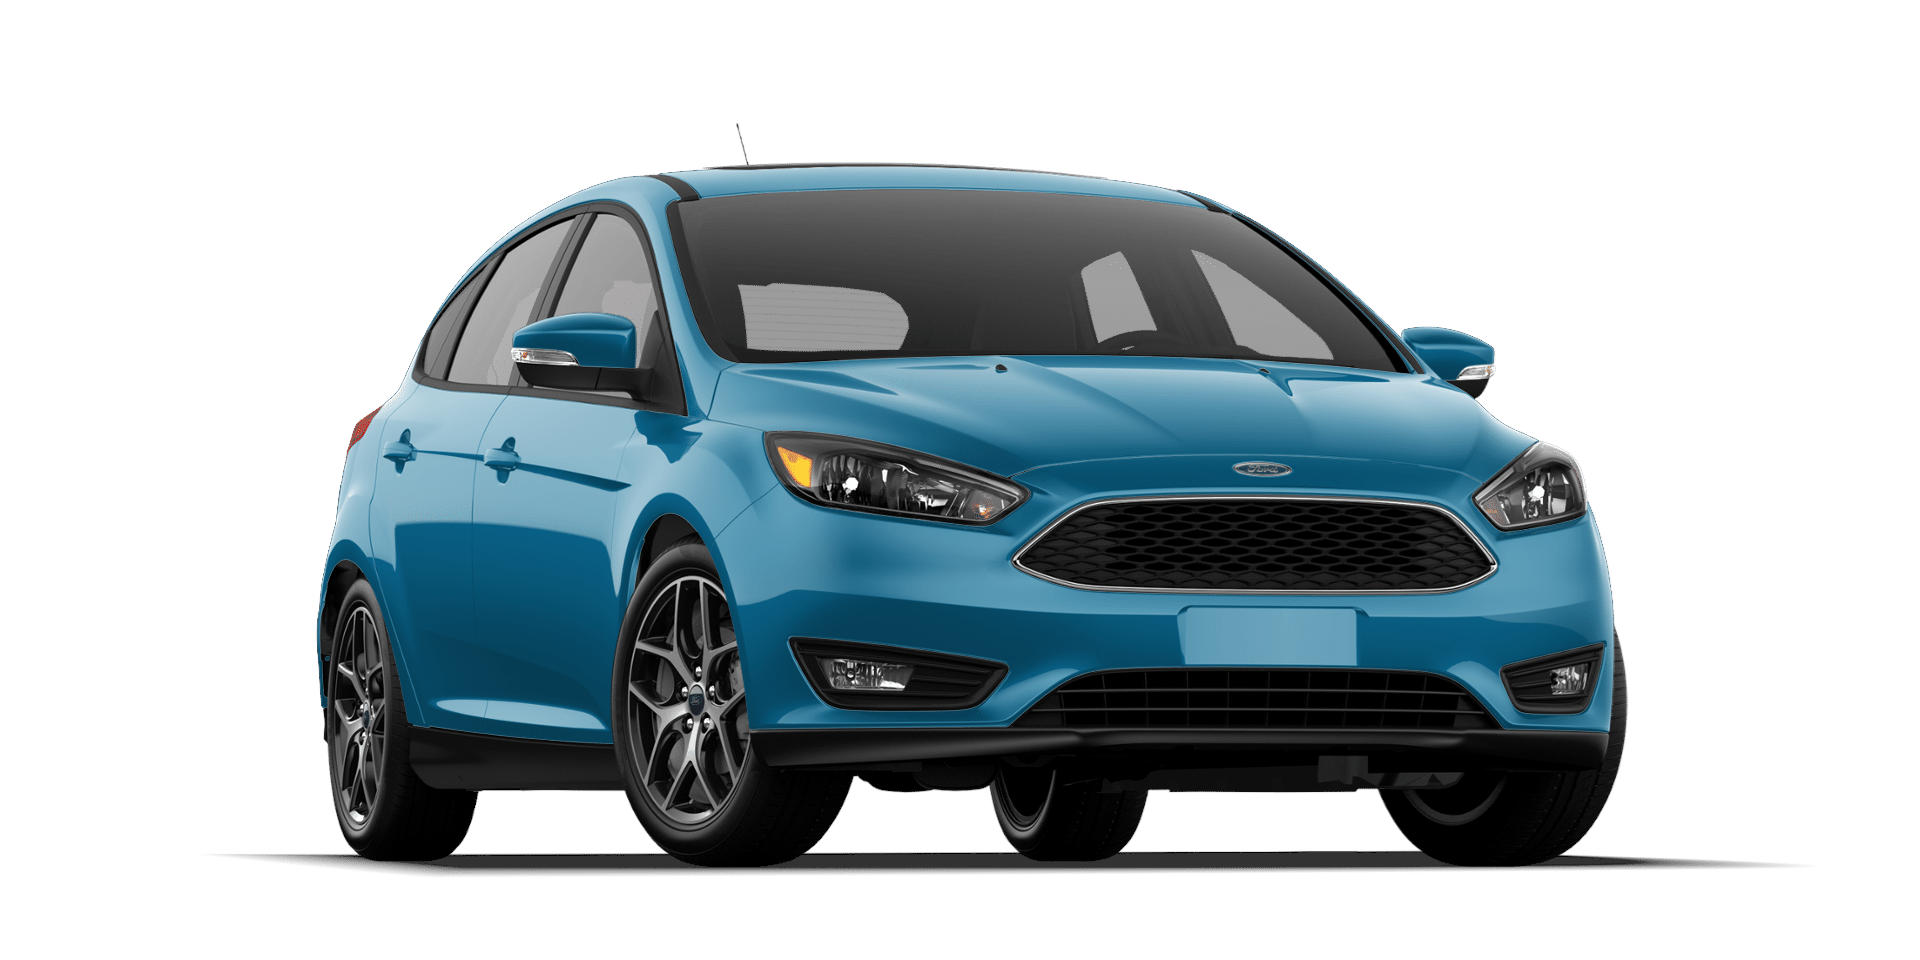 2018 Ford Focus SE Hatchback Full Specs, Features and Price | CarBuzz